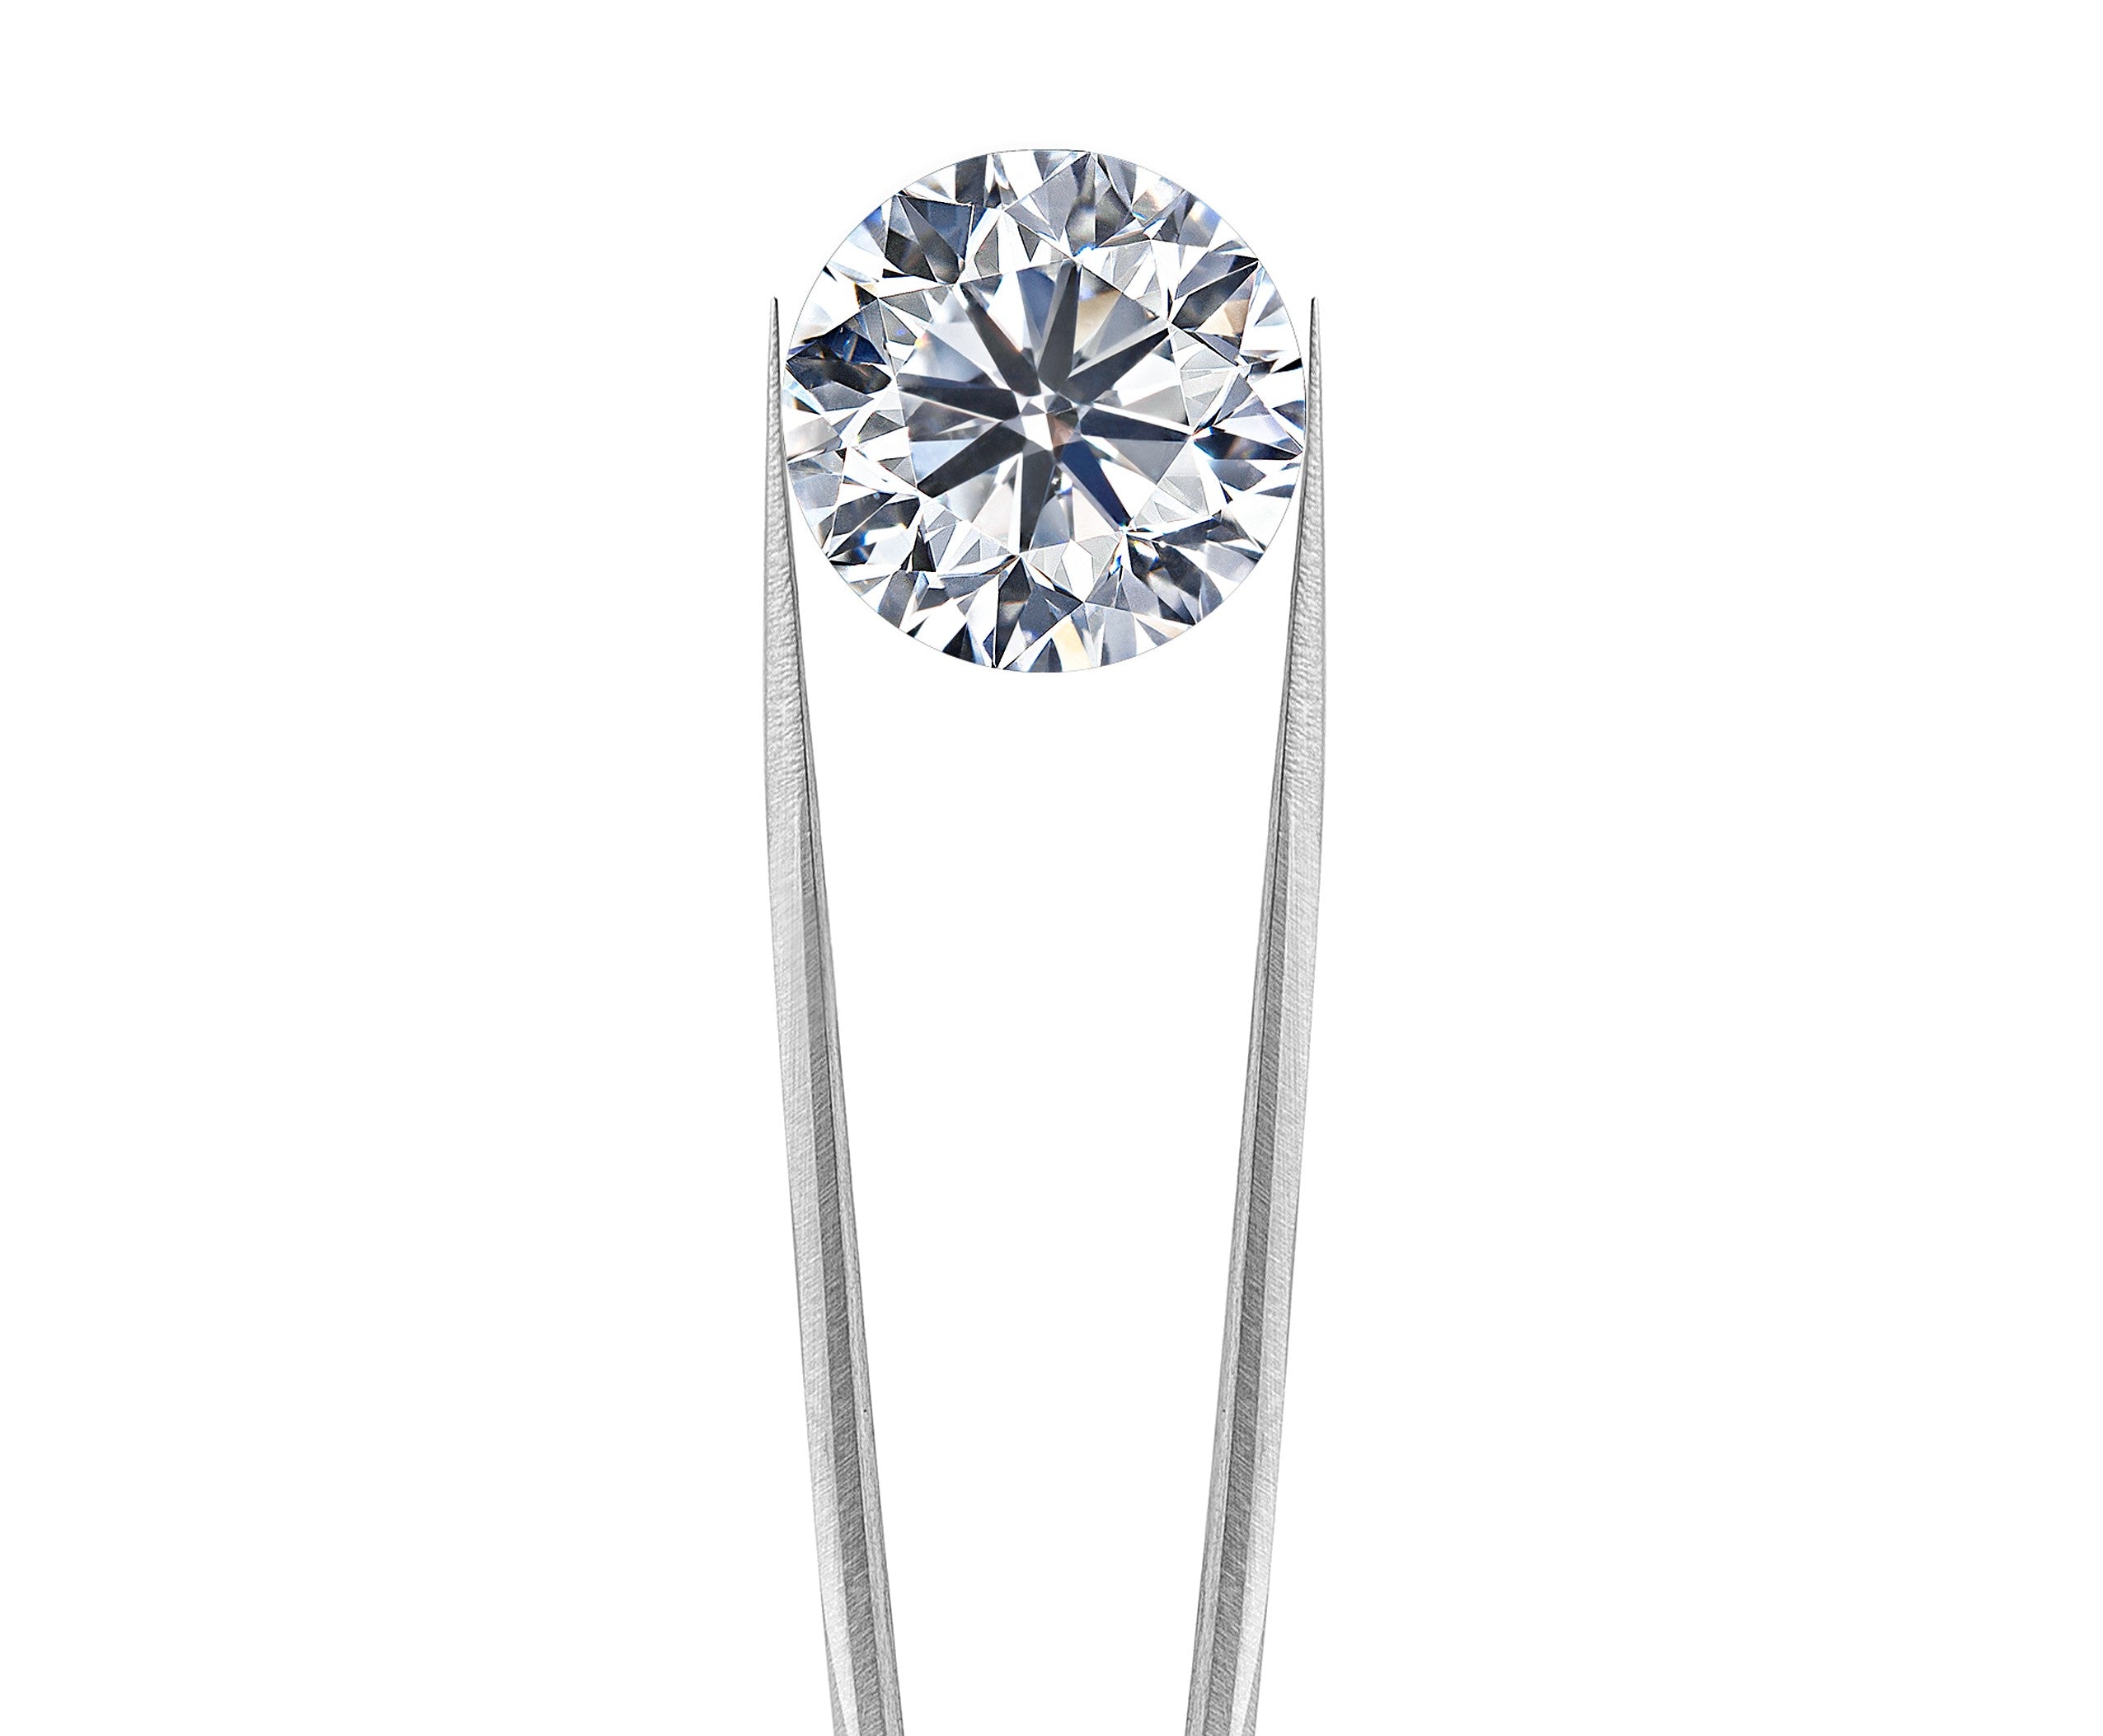 Round shaped diamond held by a tweezer on a white background